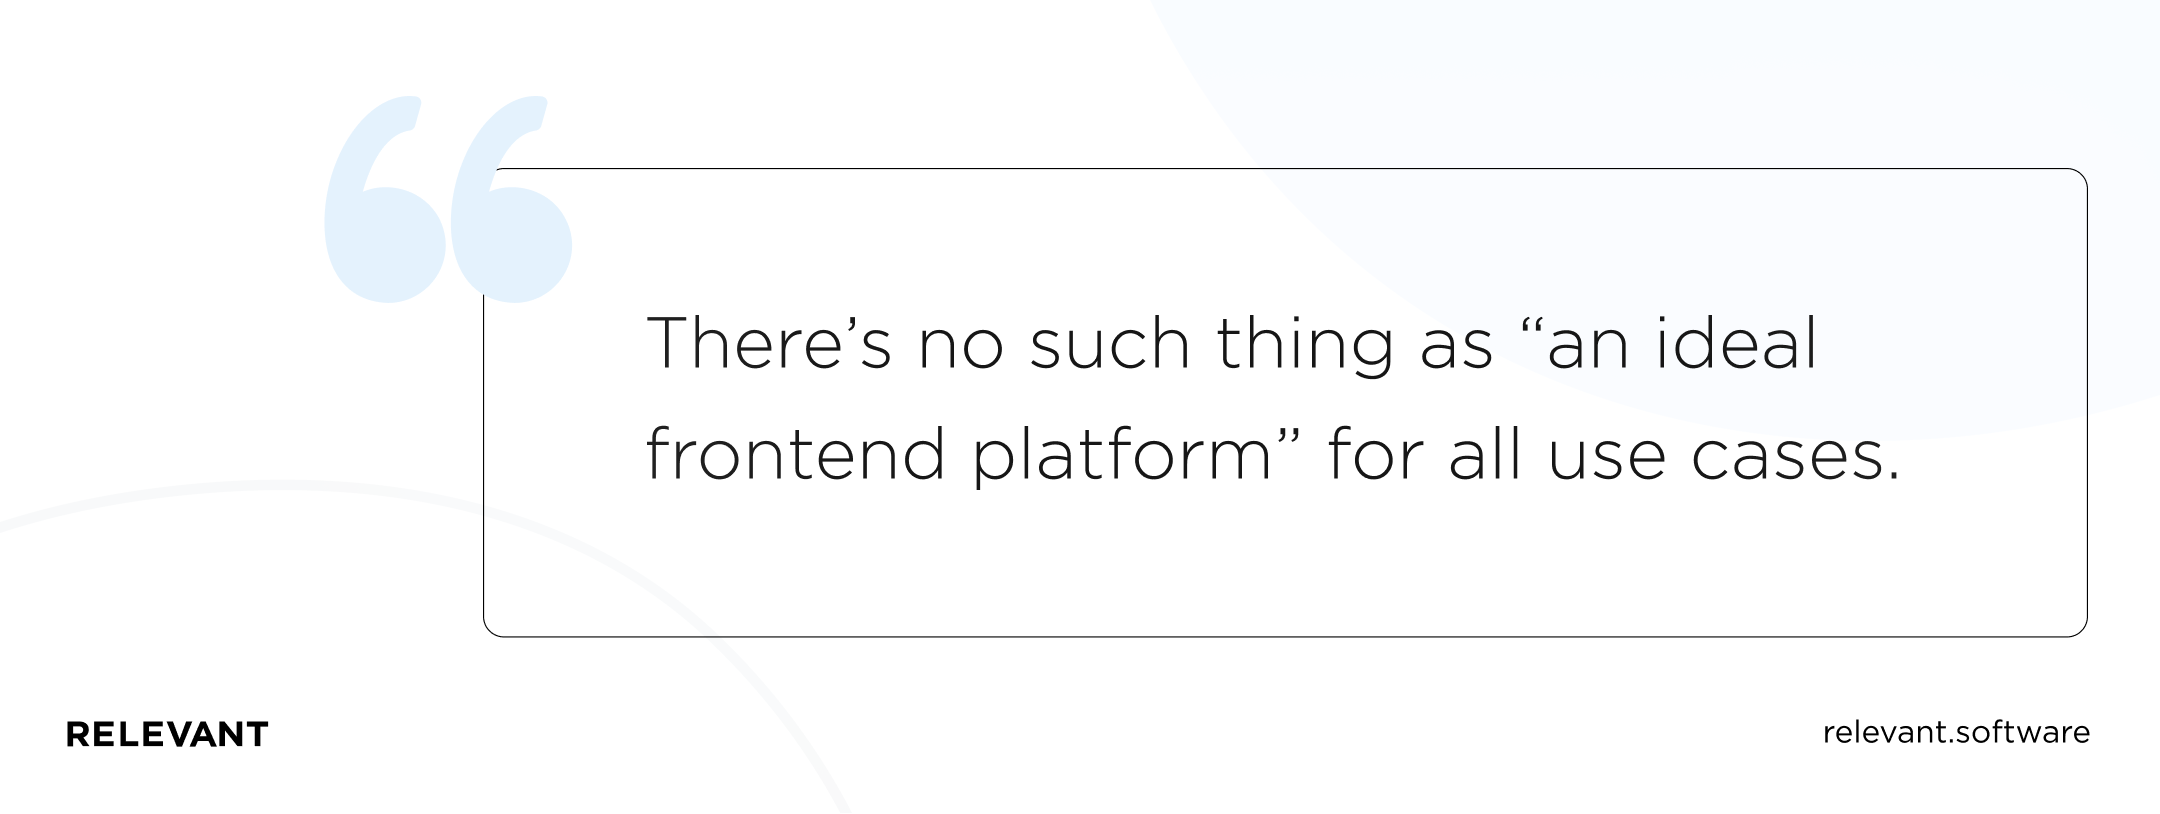 There’s no such thing as “an ideal frontend platform” for all use cases